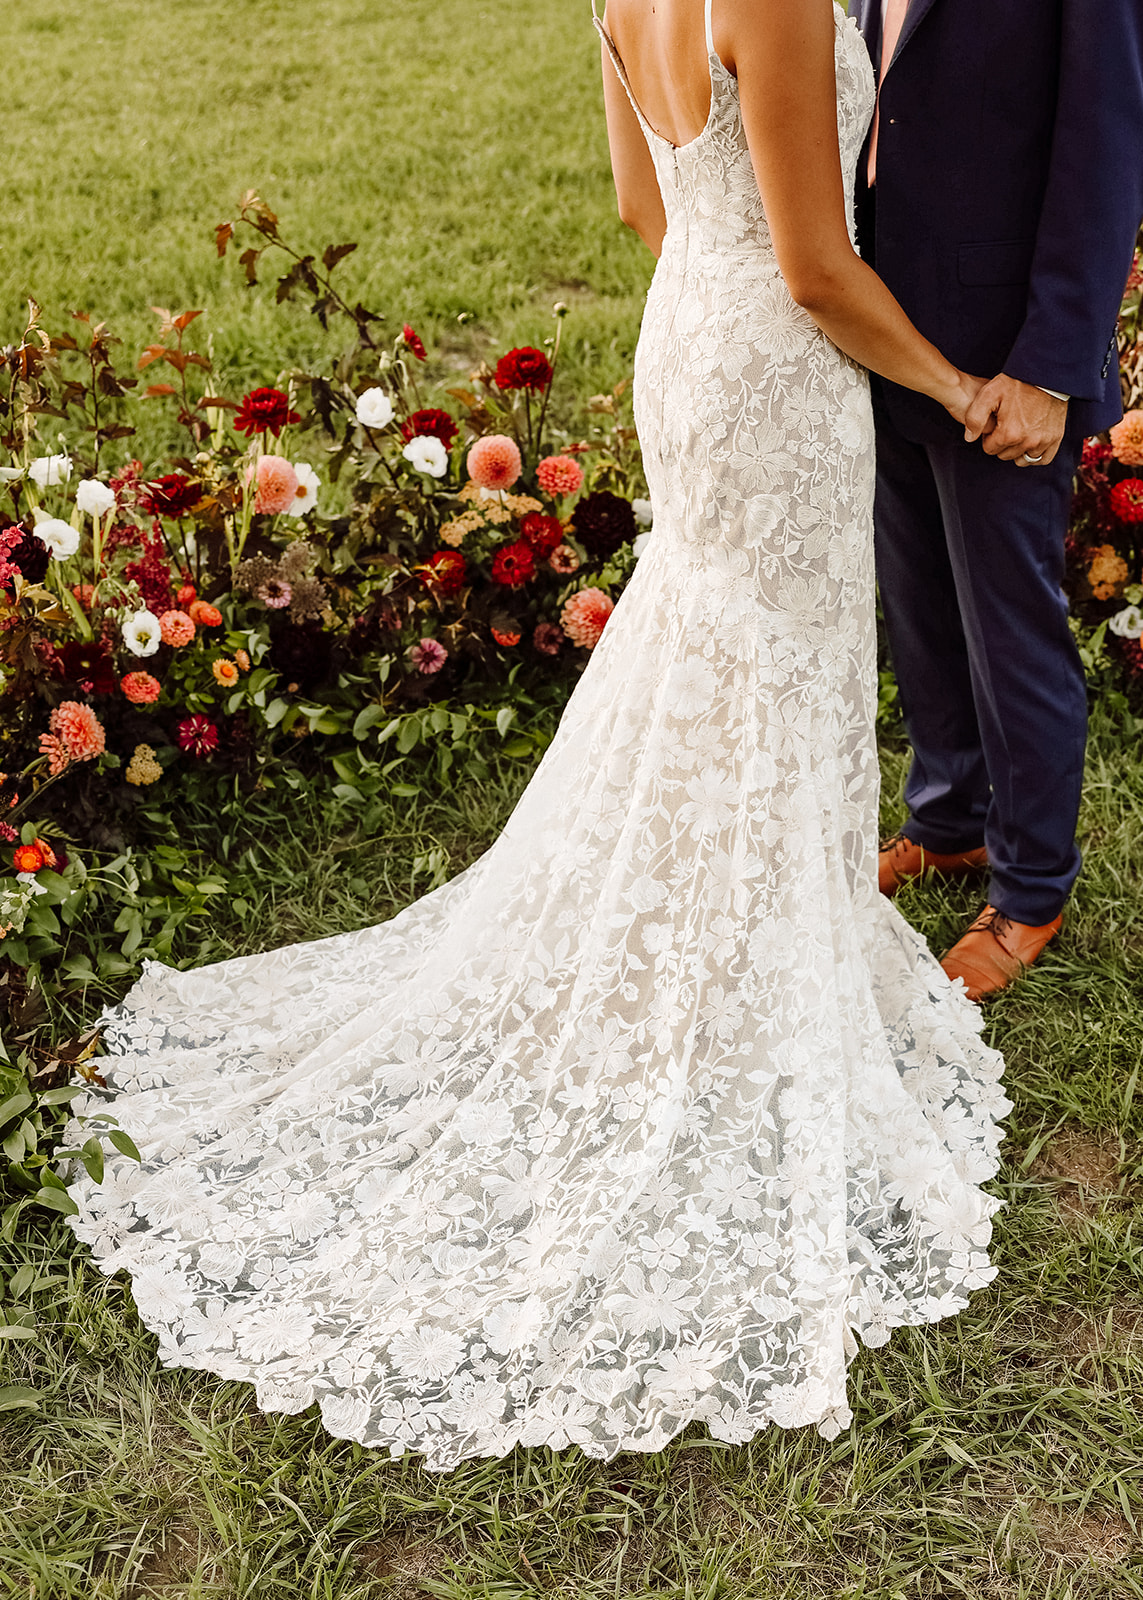 Close up to the bride's lace wedding dress